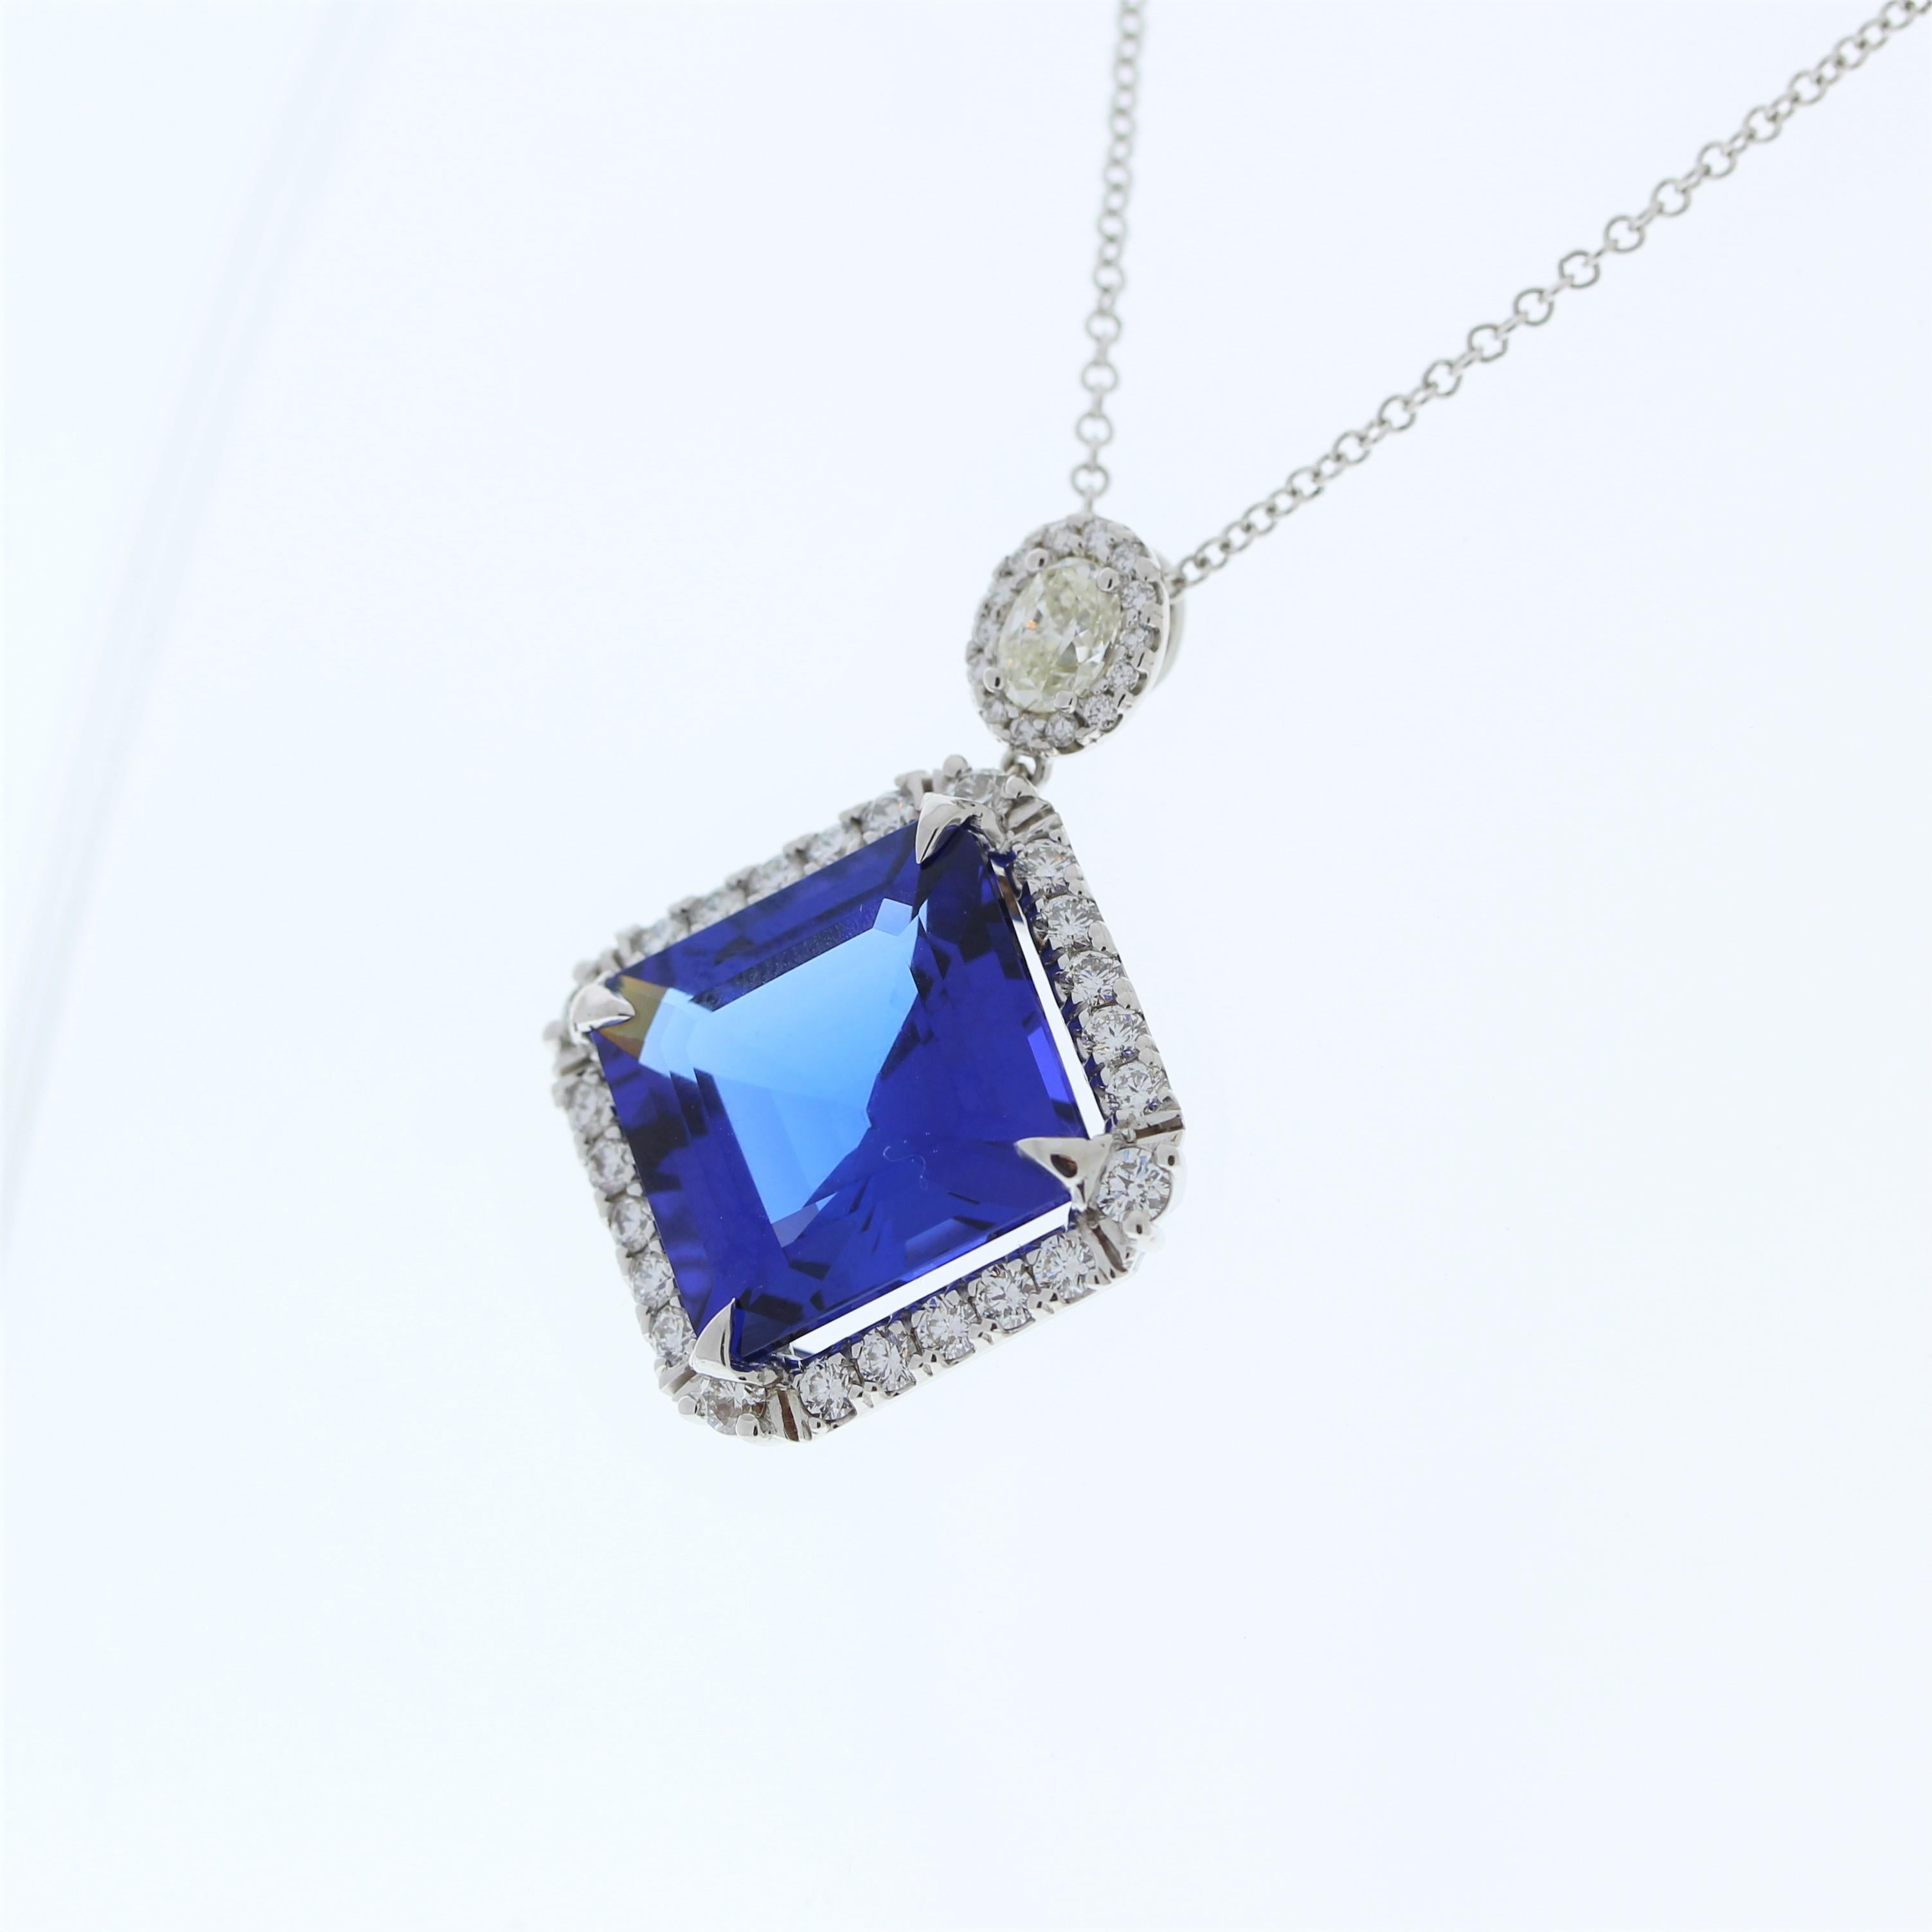 A fashion pendant featuring an 18k white gold setting with a main stone of a square emerald-cut bluish violet tanzanite weighing 21.00 carats and a single oval-cut diamond weighing 0.52 carats as a side stone would be a truly remarkable and stunning